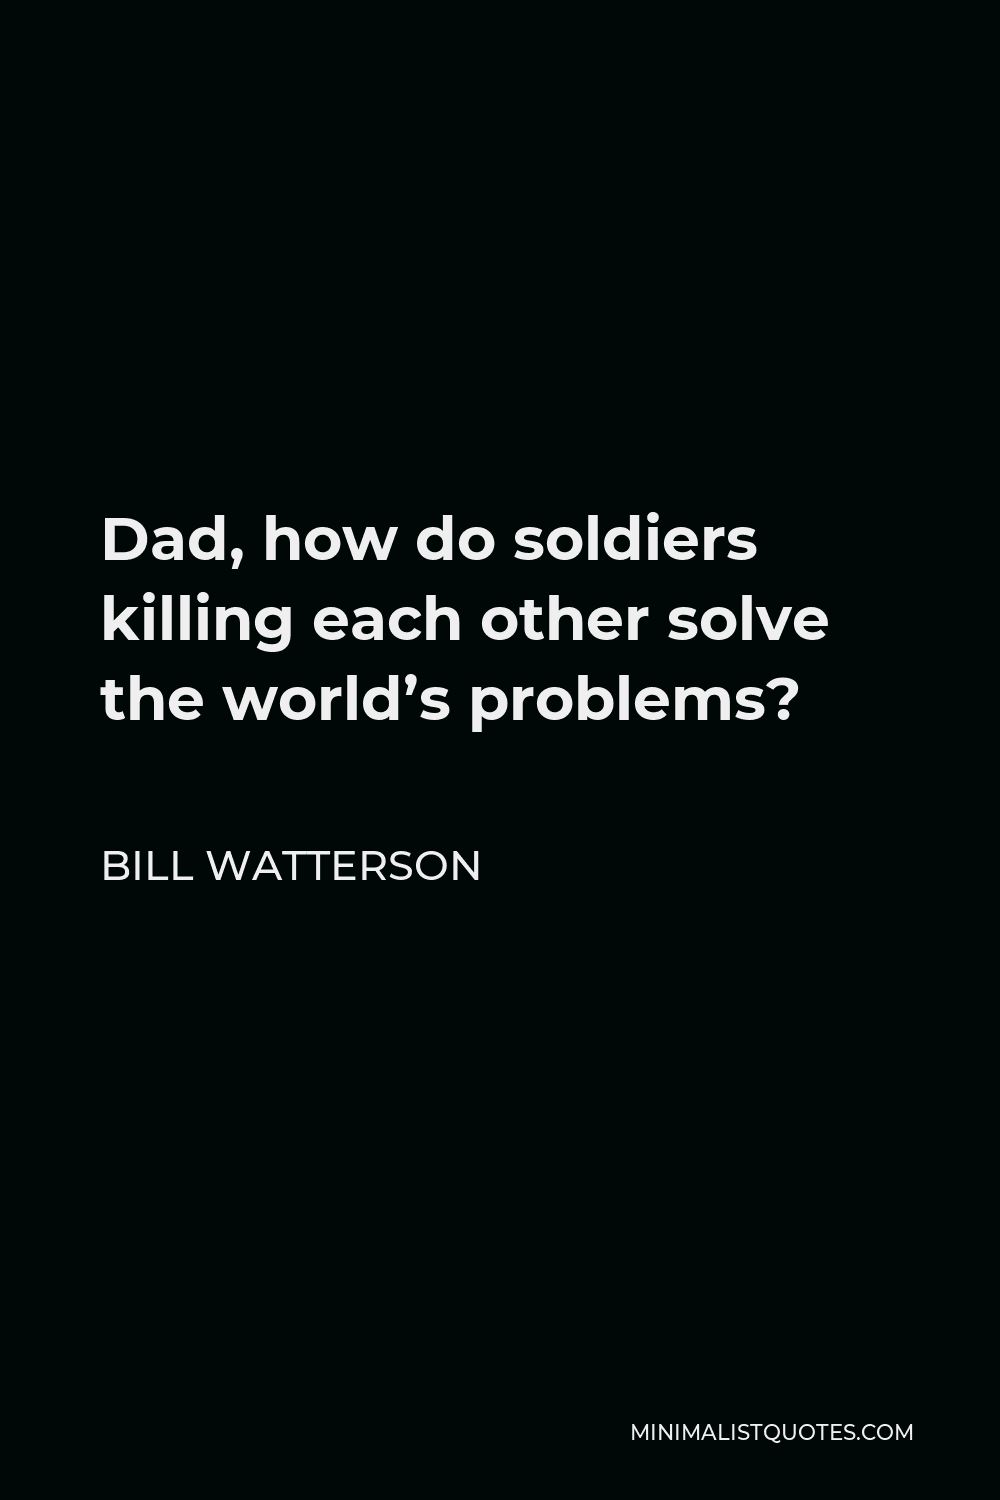 Bill Watterson Quote - Dad, how do soldiers killing each other solve the world’s problems?